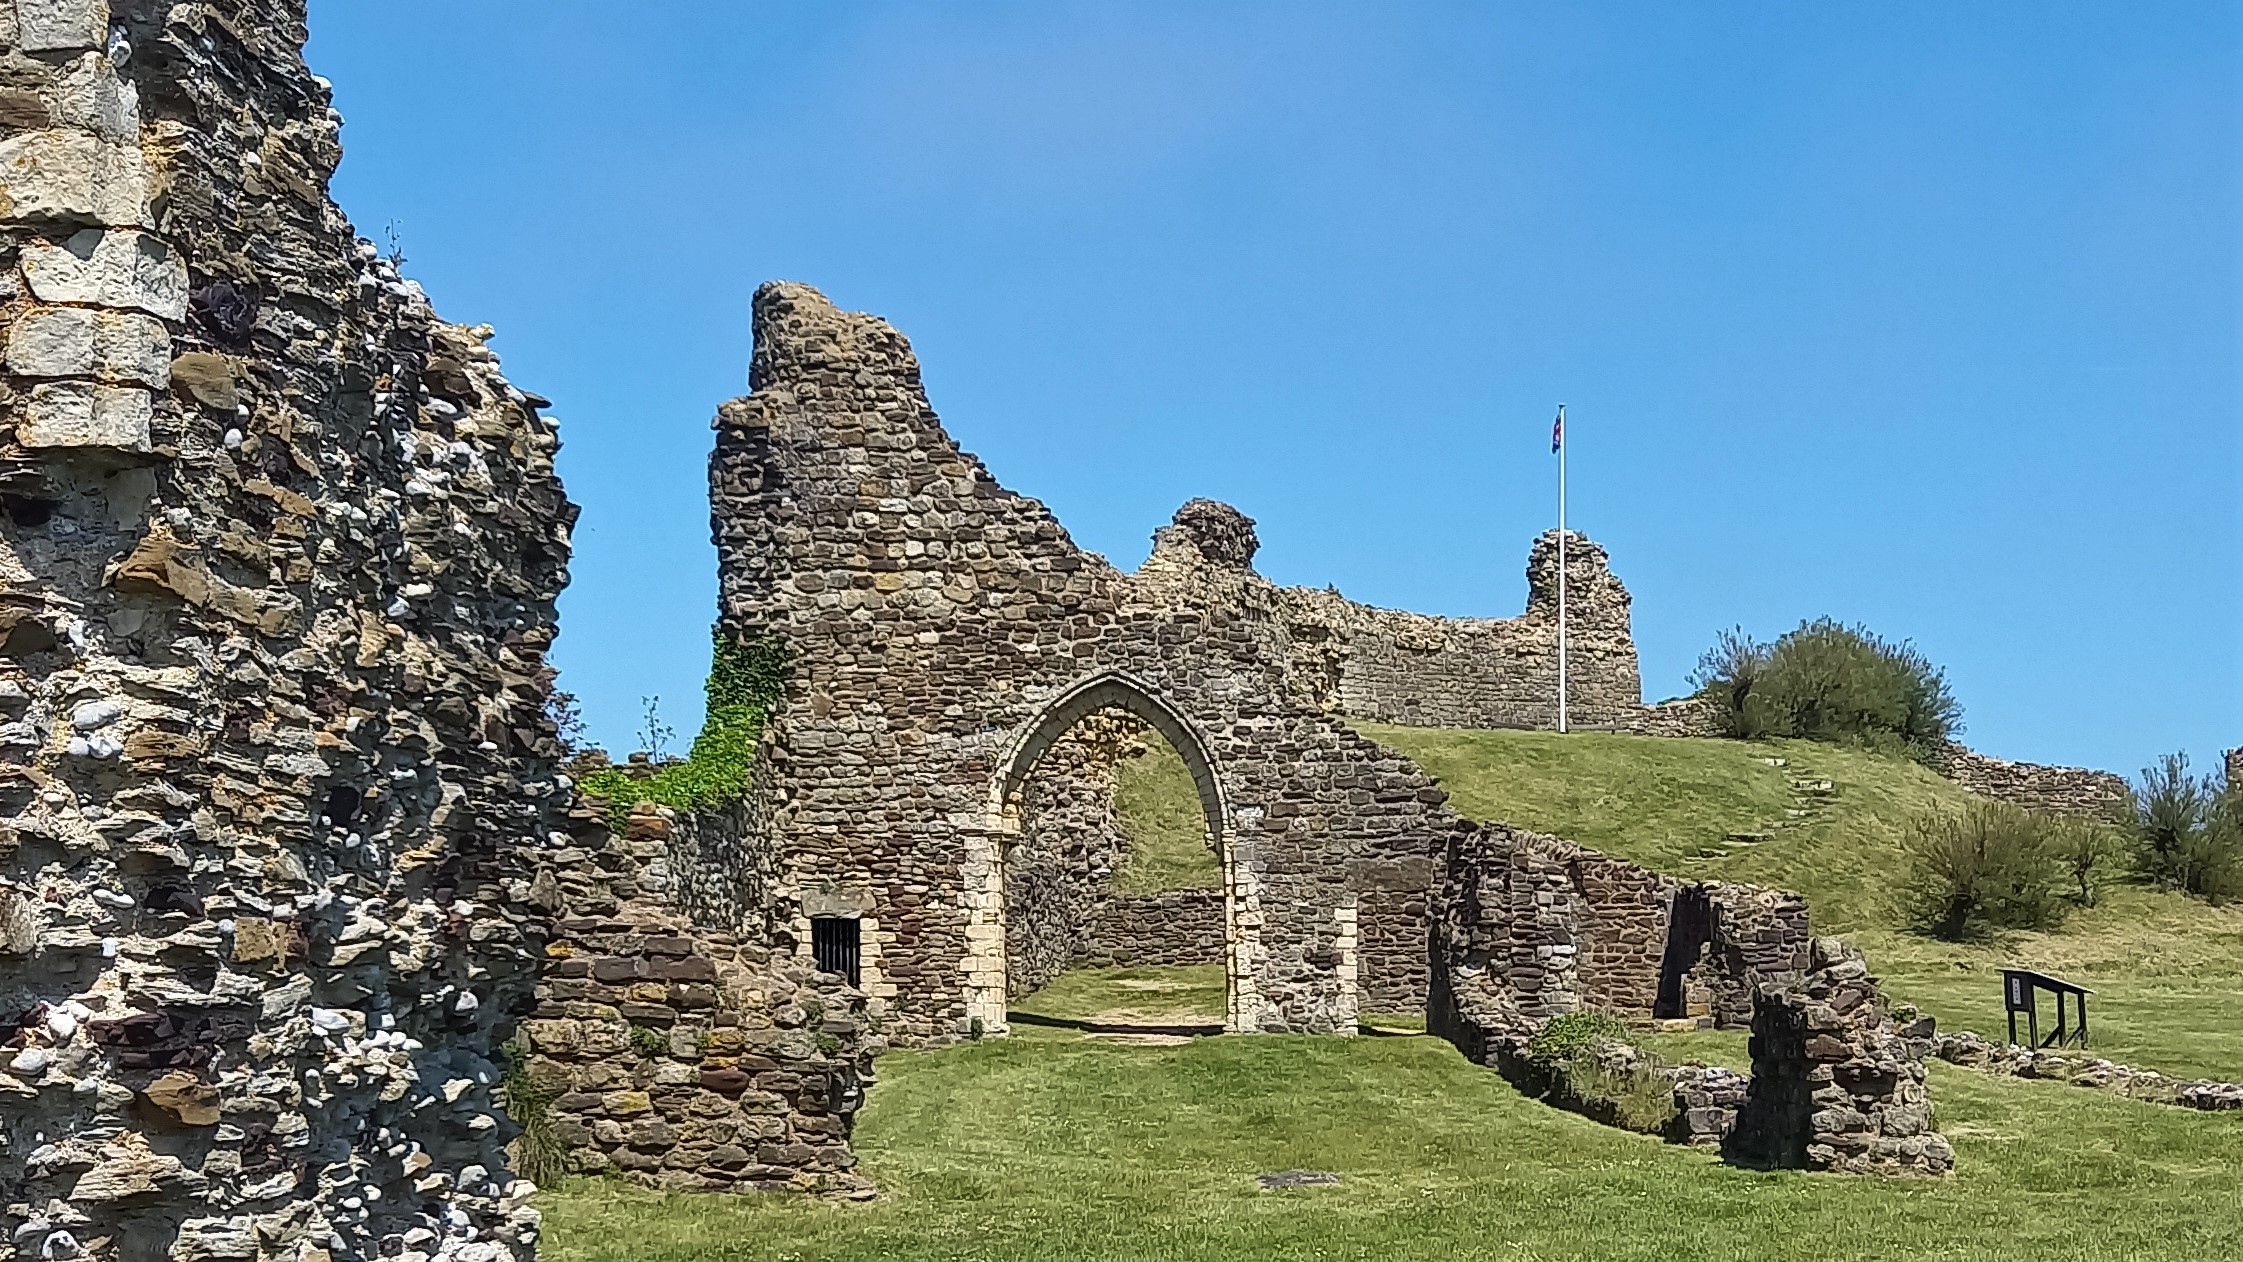 Re-imagining Hastings Castle - Have your say and win £50!